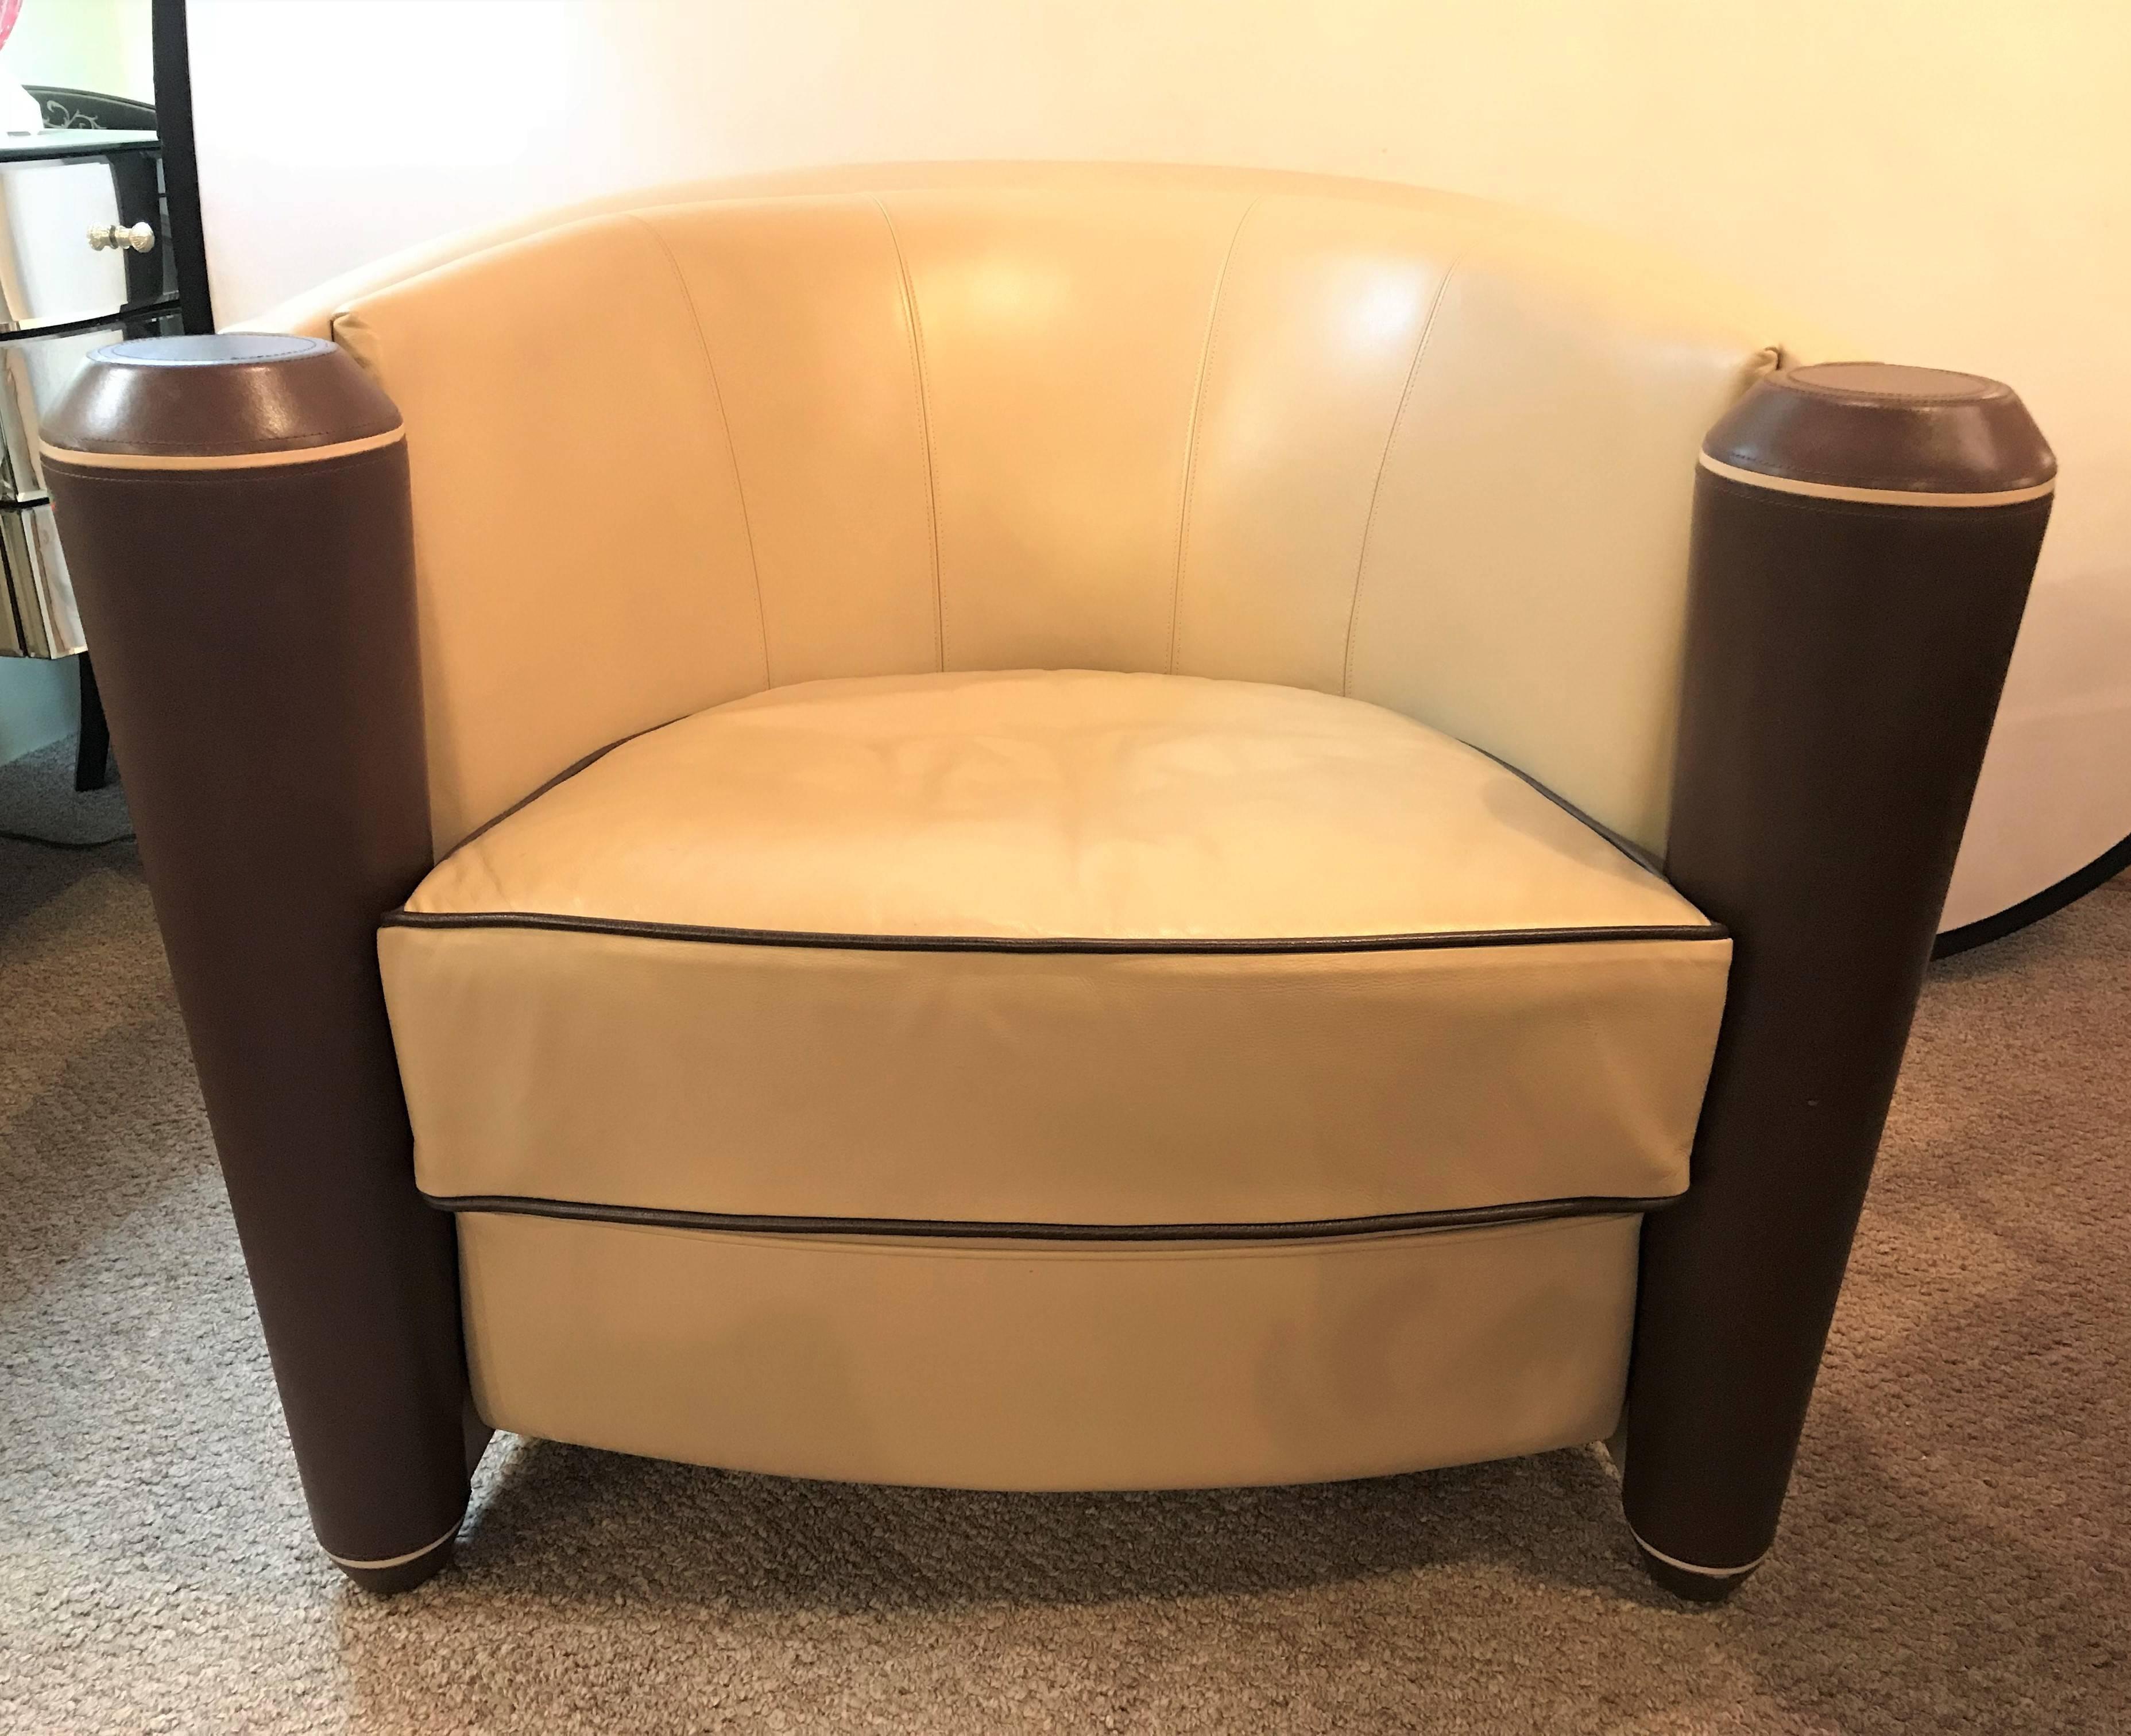 An i4 Mariani Marnie Tub chair by Adam Tihany for Pace. This fine chair was purchase at Pace for over $9000 by this highly sought after designer and lived in a Greenwich CT mansion until it was purchased by us and is now offered for sale for a